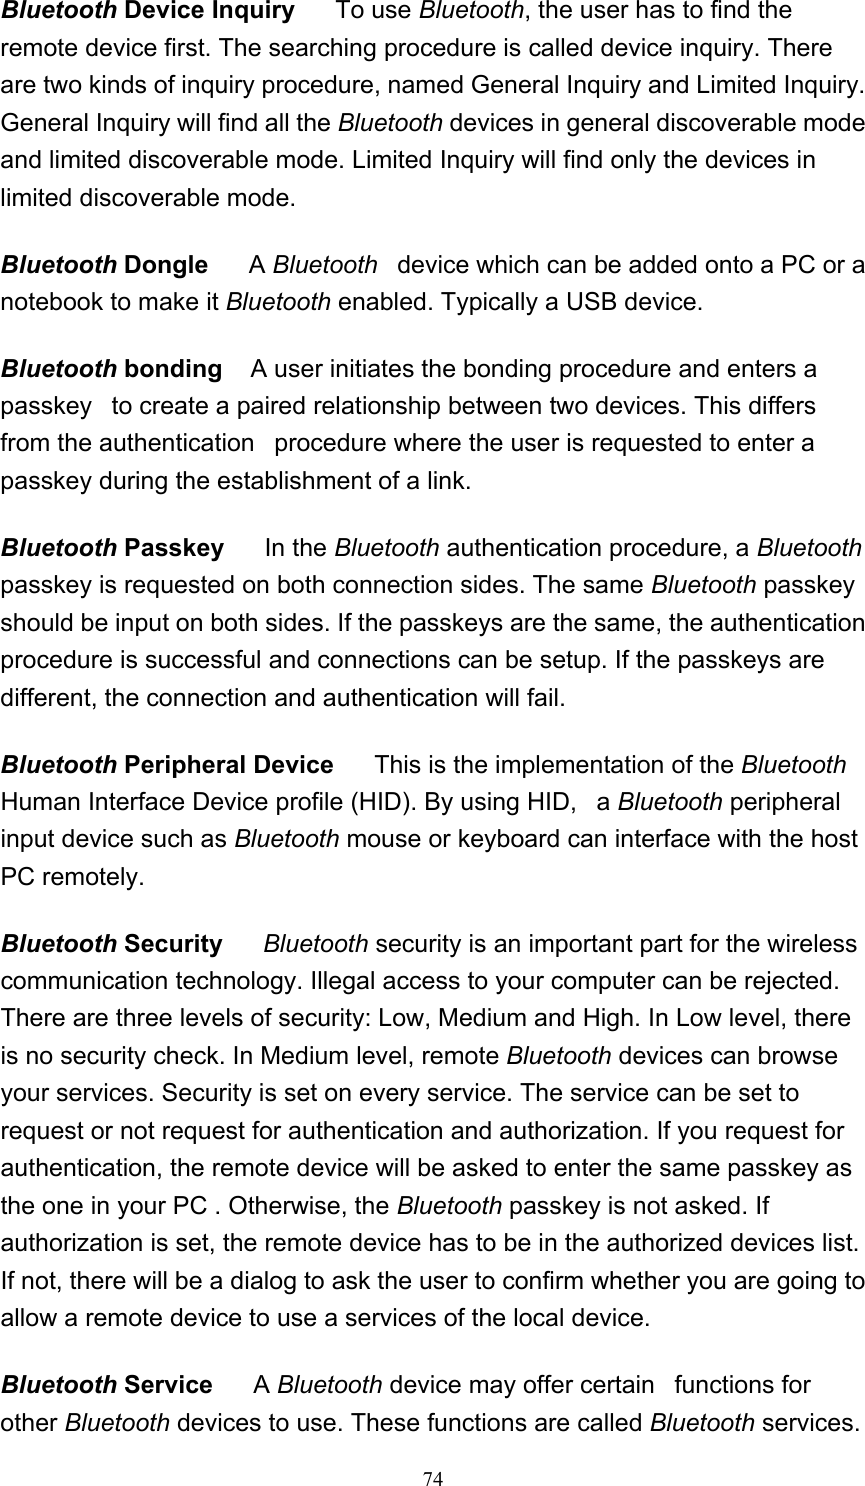   74Bluetooth Device Inquiry     To use Bluetooth, the user has to find the remote device first. The searching procedure is called device inquiry. There are two kinds of inquiry procedure, named General Inquiry and Limited Inquiry. General Inquiry will find all the Bluetooth devices in general discoverable mode and limited discoverable mode. Limited Inquiry will find only the devices in limited discoverable mode.  Bluetooth Dongle      A Bluetooth   device which can be added onto a PC or a notebook to make it Bluetooth enabled. Typically a USB device.  Bluetooth bonding    A user initiates the bonding procedure and enters a passkey   to create a paired relationship between two devices. This differs from the authentication   procedure where the user is requested to enter a passkey during the establishment of a link.  Bluetooth Passkey     In the Bluetooth authentication procedure, a Bluetooth passkey is requested on both connection sides. The same Bluetooth passkey should be input on both sides. If the passkeys are the same, the authentication procedure is successful and connections can be setup. If the passkeys are different, the connection and authentication will fail.  Bluetooth Peripheral Device      This is the implementation of the Bluetooth Human Interface Device profile (HID). By using HID,   a Bluetooth peripheral input device such as Bluetooth mouse or keyboard can interface with the host PC remotely.  Bluetooth Security      Bluetooth security is an important part for the wireless communication technology. Illegal access to your computer can be rejected. There are three levels of security: Low, Medium and High. In Low level, there is no security check. In Medium level, remote Bluetooth devices can browse your services. Security is set on every service. The service can be set to request or not request for authentication and authorization. If you request for authentication, the remote device will be asked to enter the same passkey as the one in your PC . Otherwise, the Bluetooth passkey is not asked. If authorization is set, the remote device has to be in the authorized devices list. If not, there will be a dialog to ask the user to confirm whether you are going to allow a remote device to use a services of the local device.  Bluetooth Service      A Bluetooth device may offer certain   functions for other Bluetooth devices to use. These functions are called Bluetooth services. 